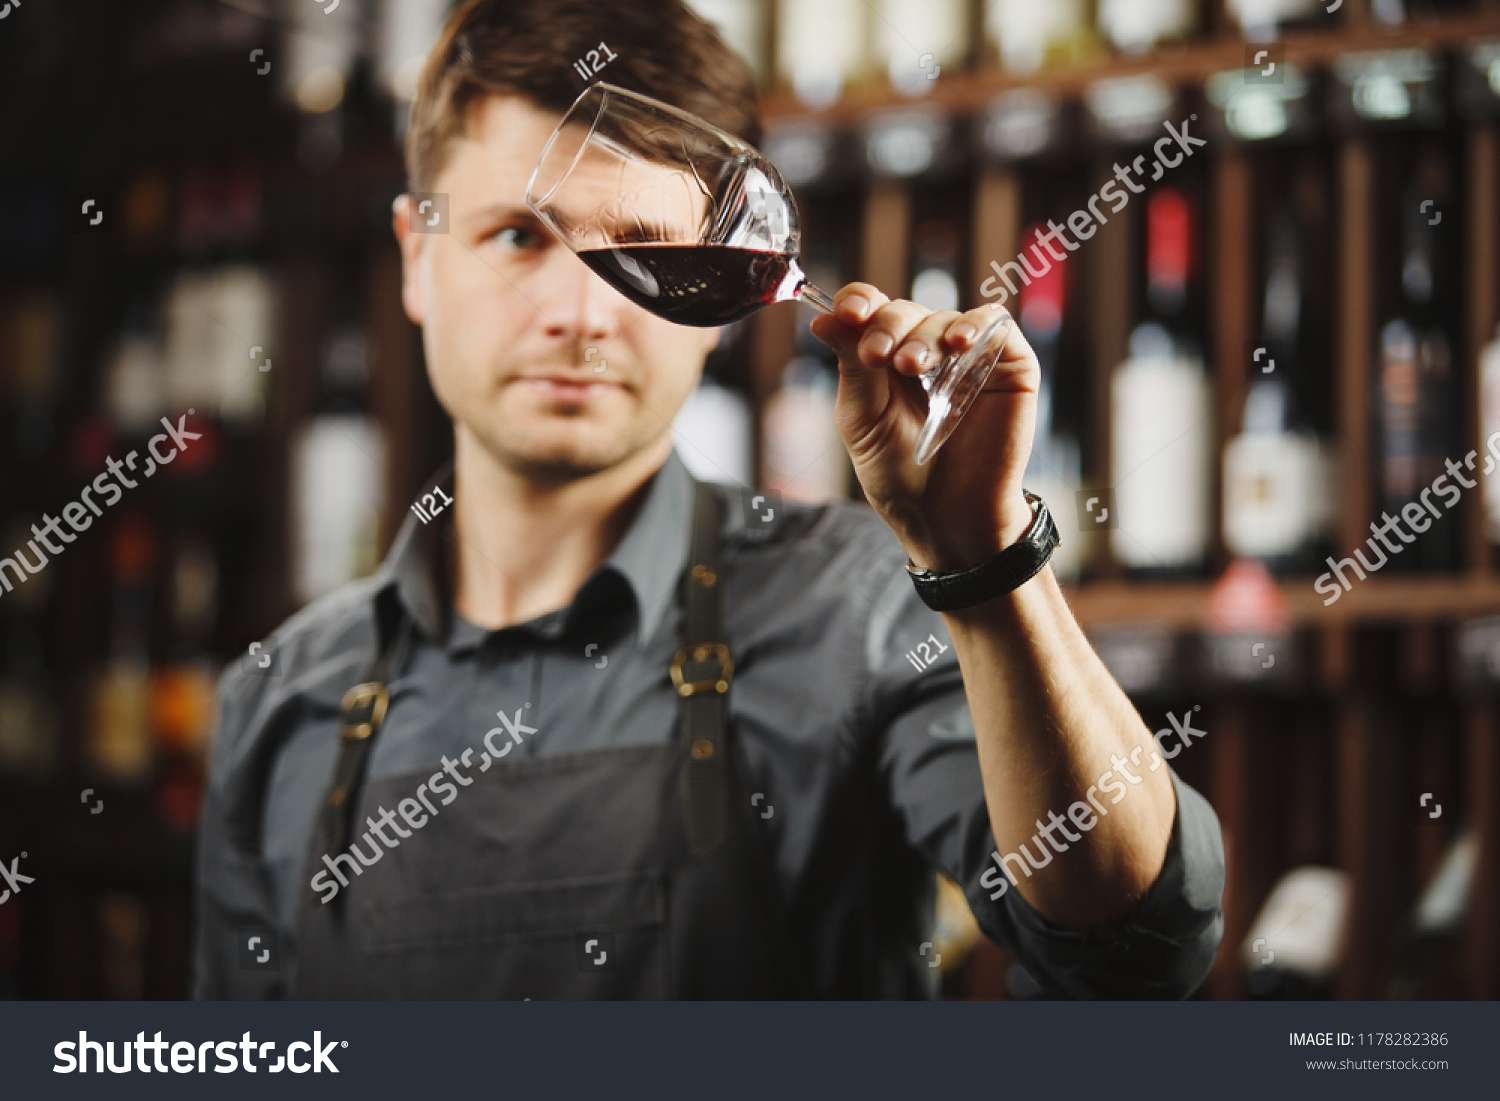 Bokal of red wine on background, male sommelier appreciating drink #1178282386